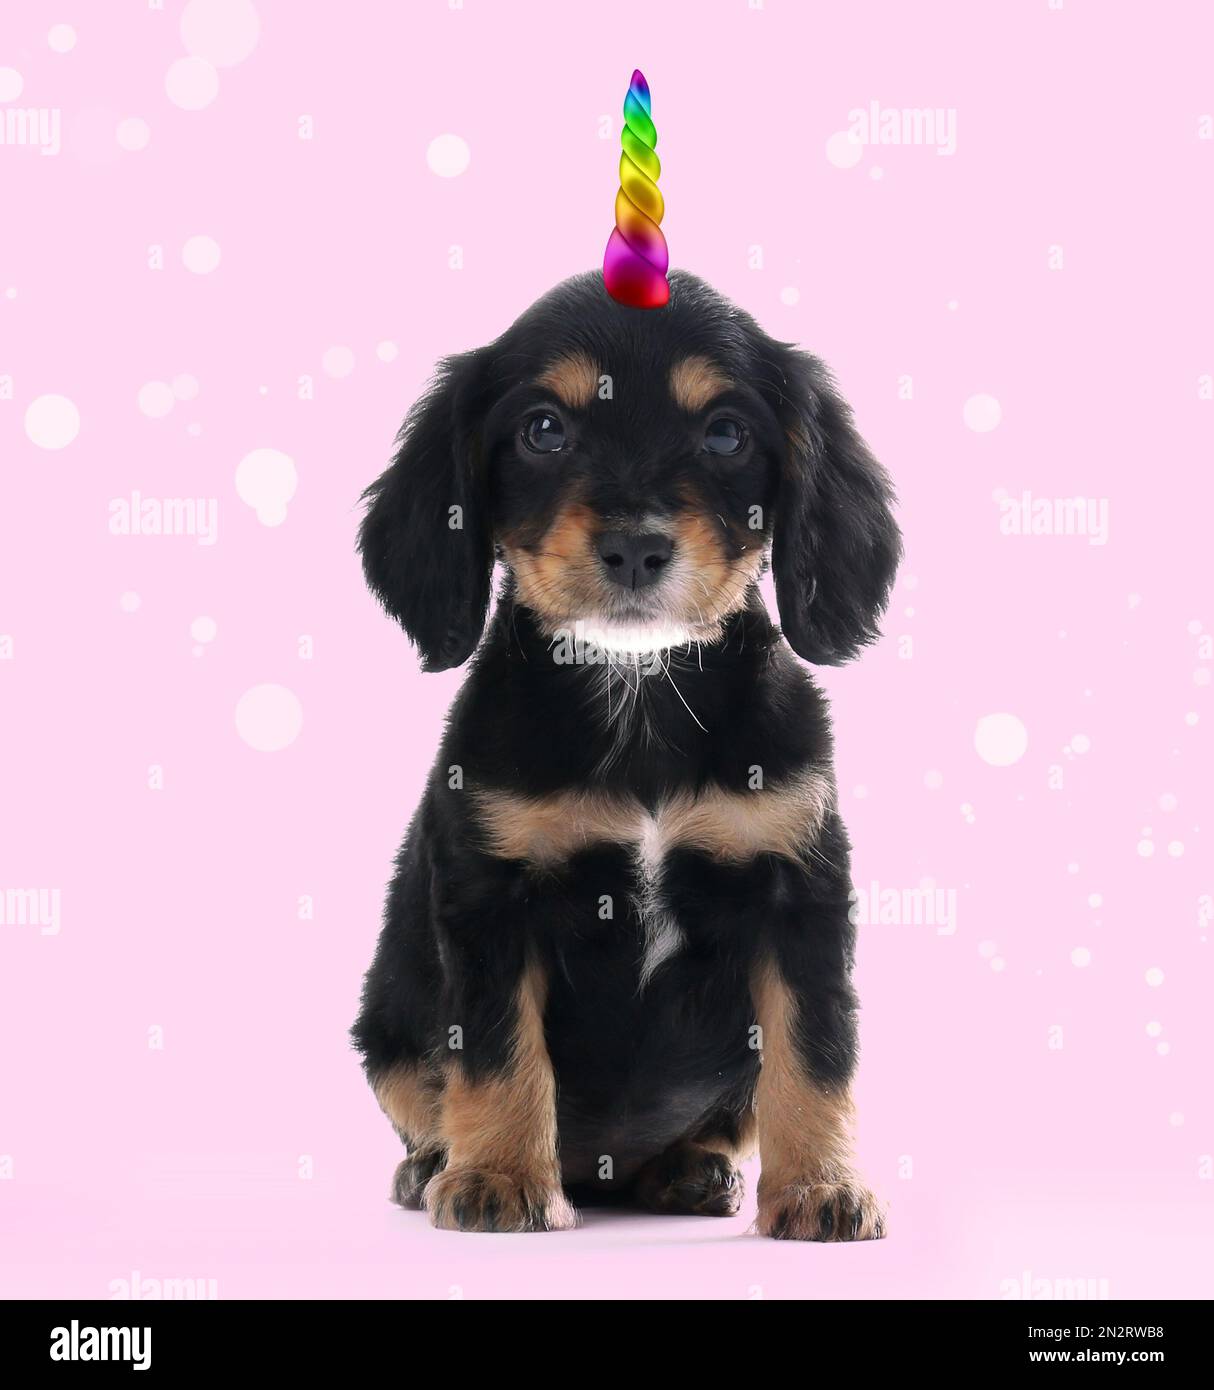 Cute puppy with rainbow unicorn horn on pink background Stock Photo